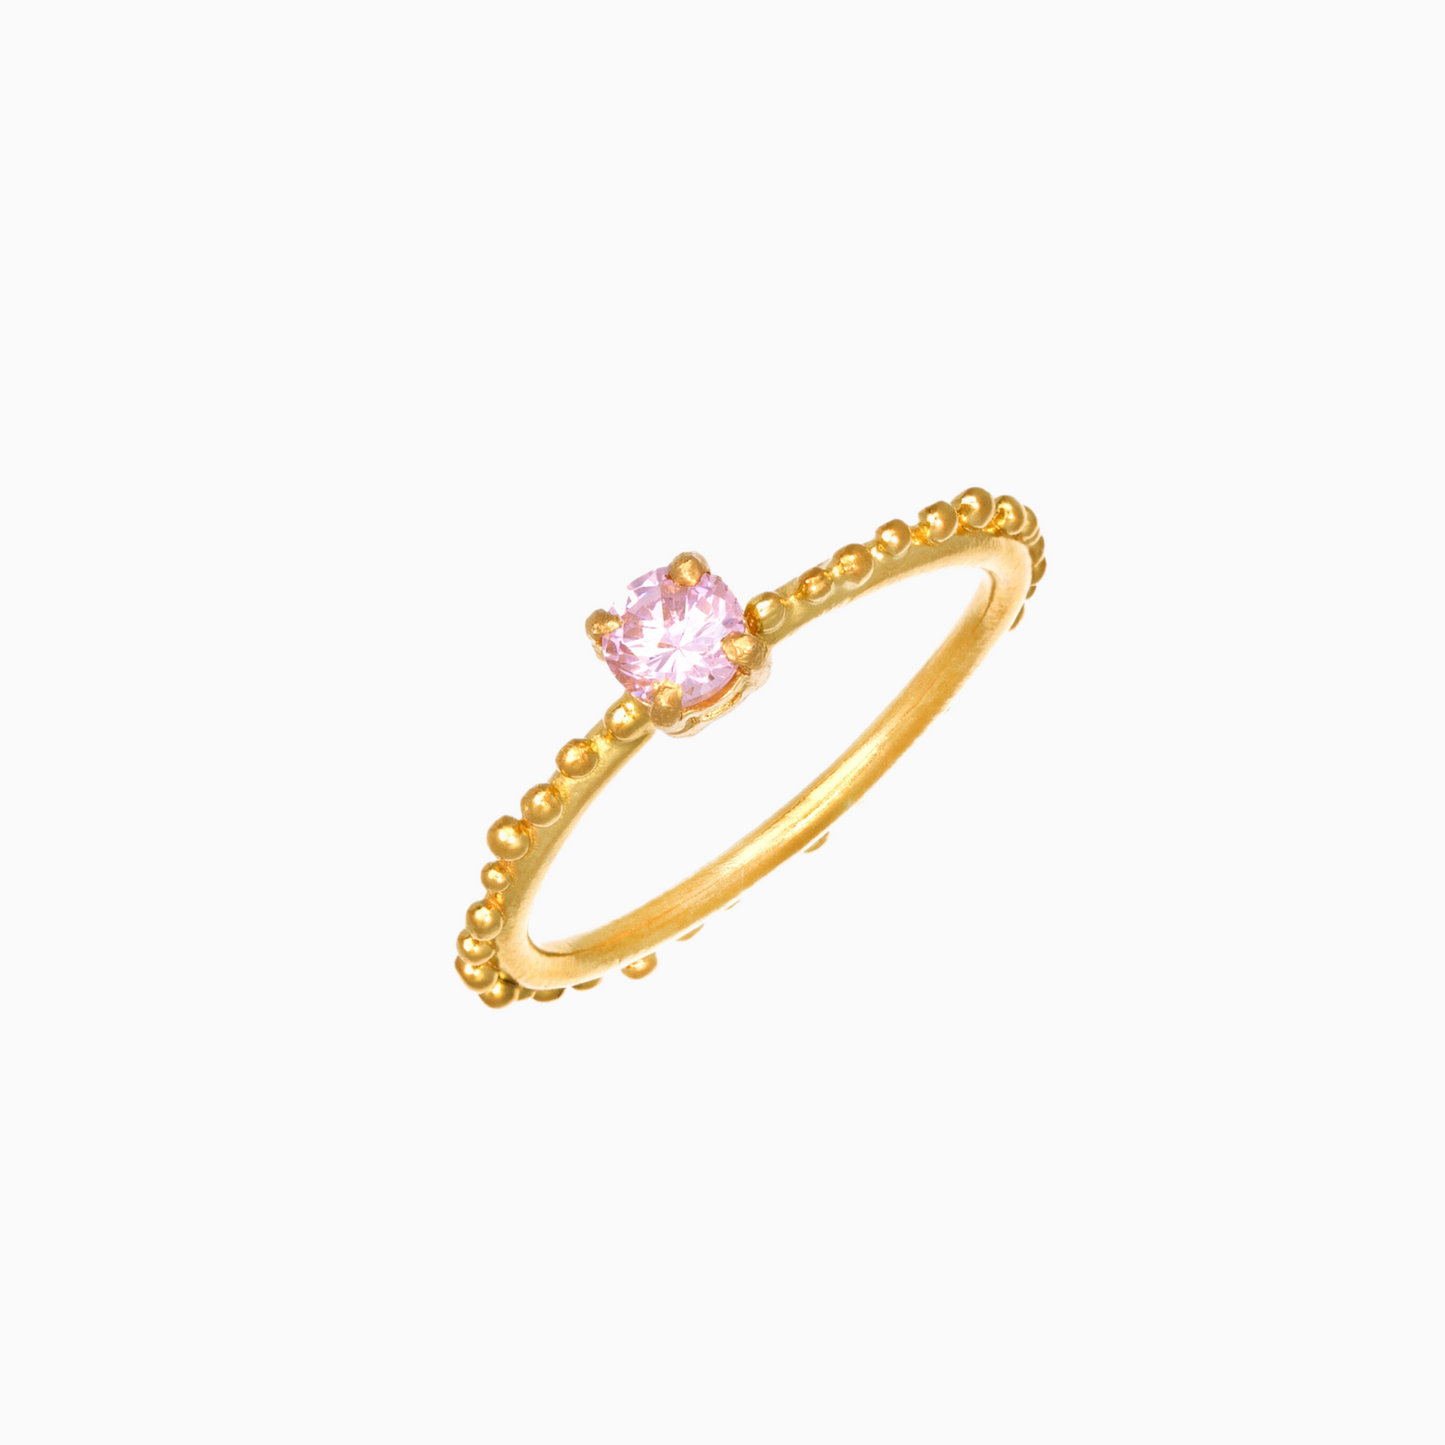 NORIDU Jewelry Bubbles ring with pink stone gold plated - Greek Jewellery Designer